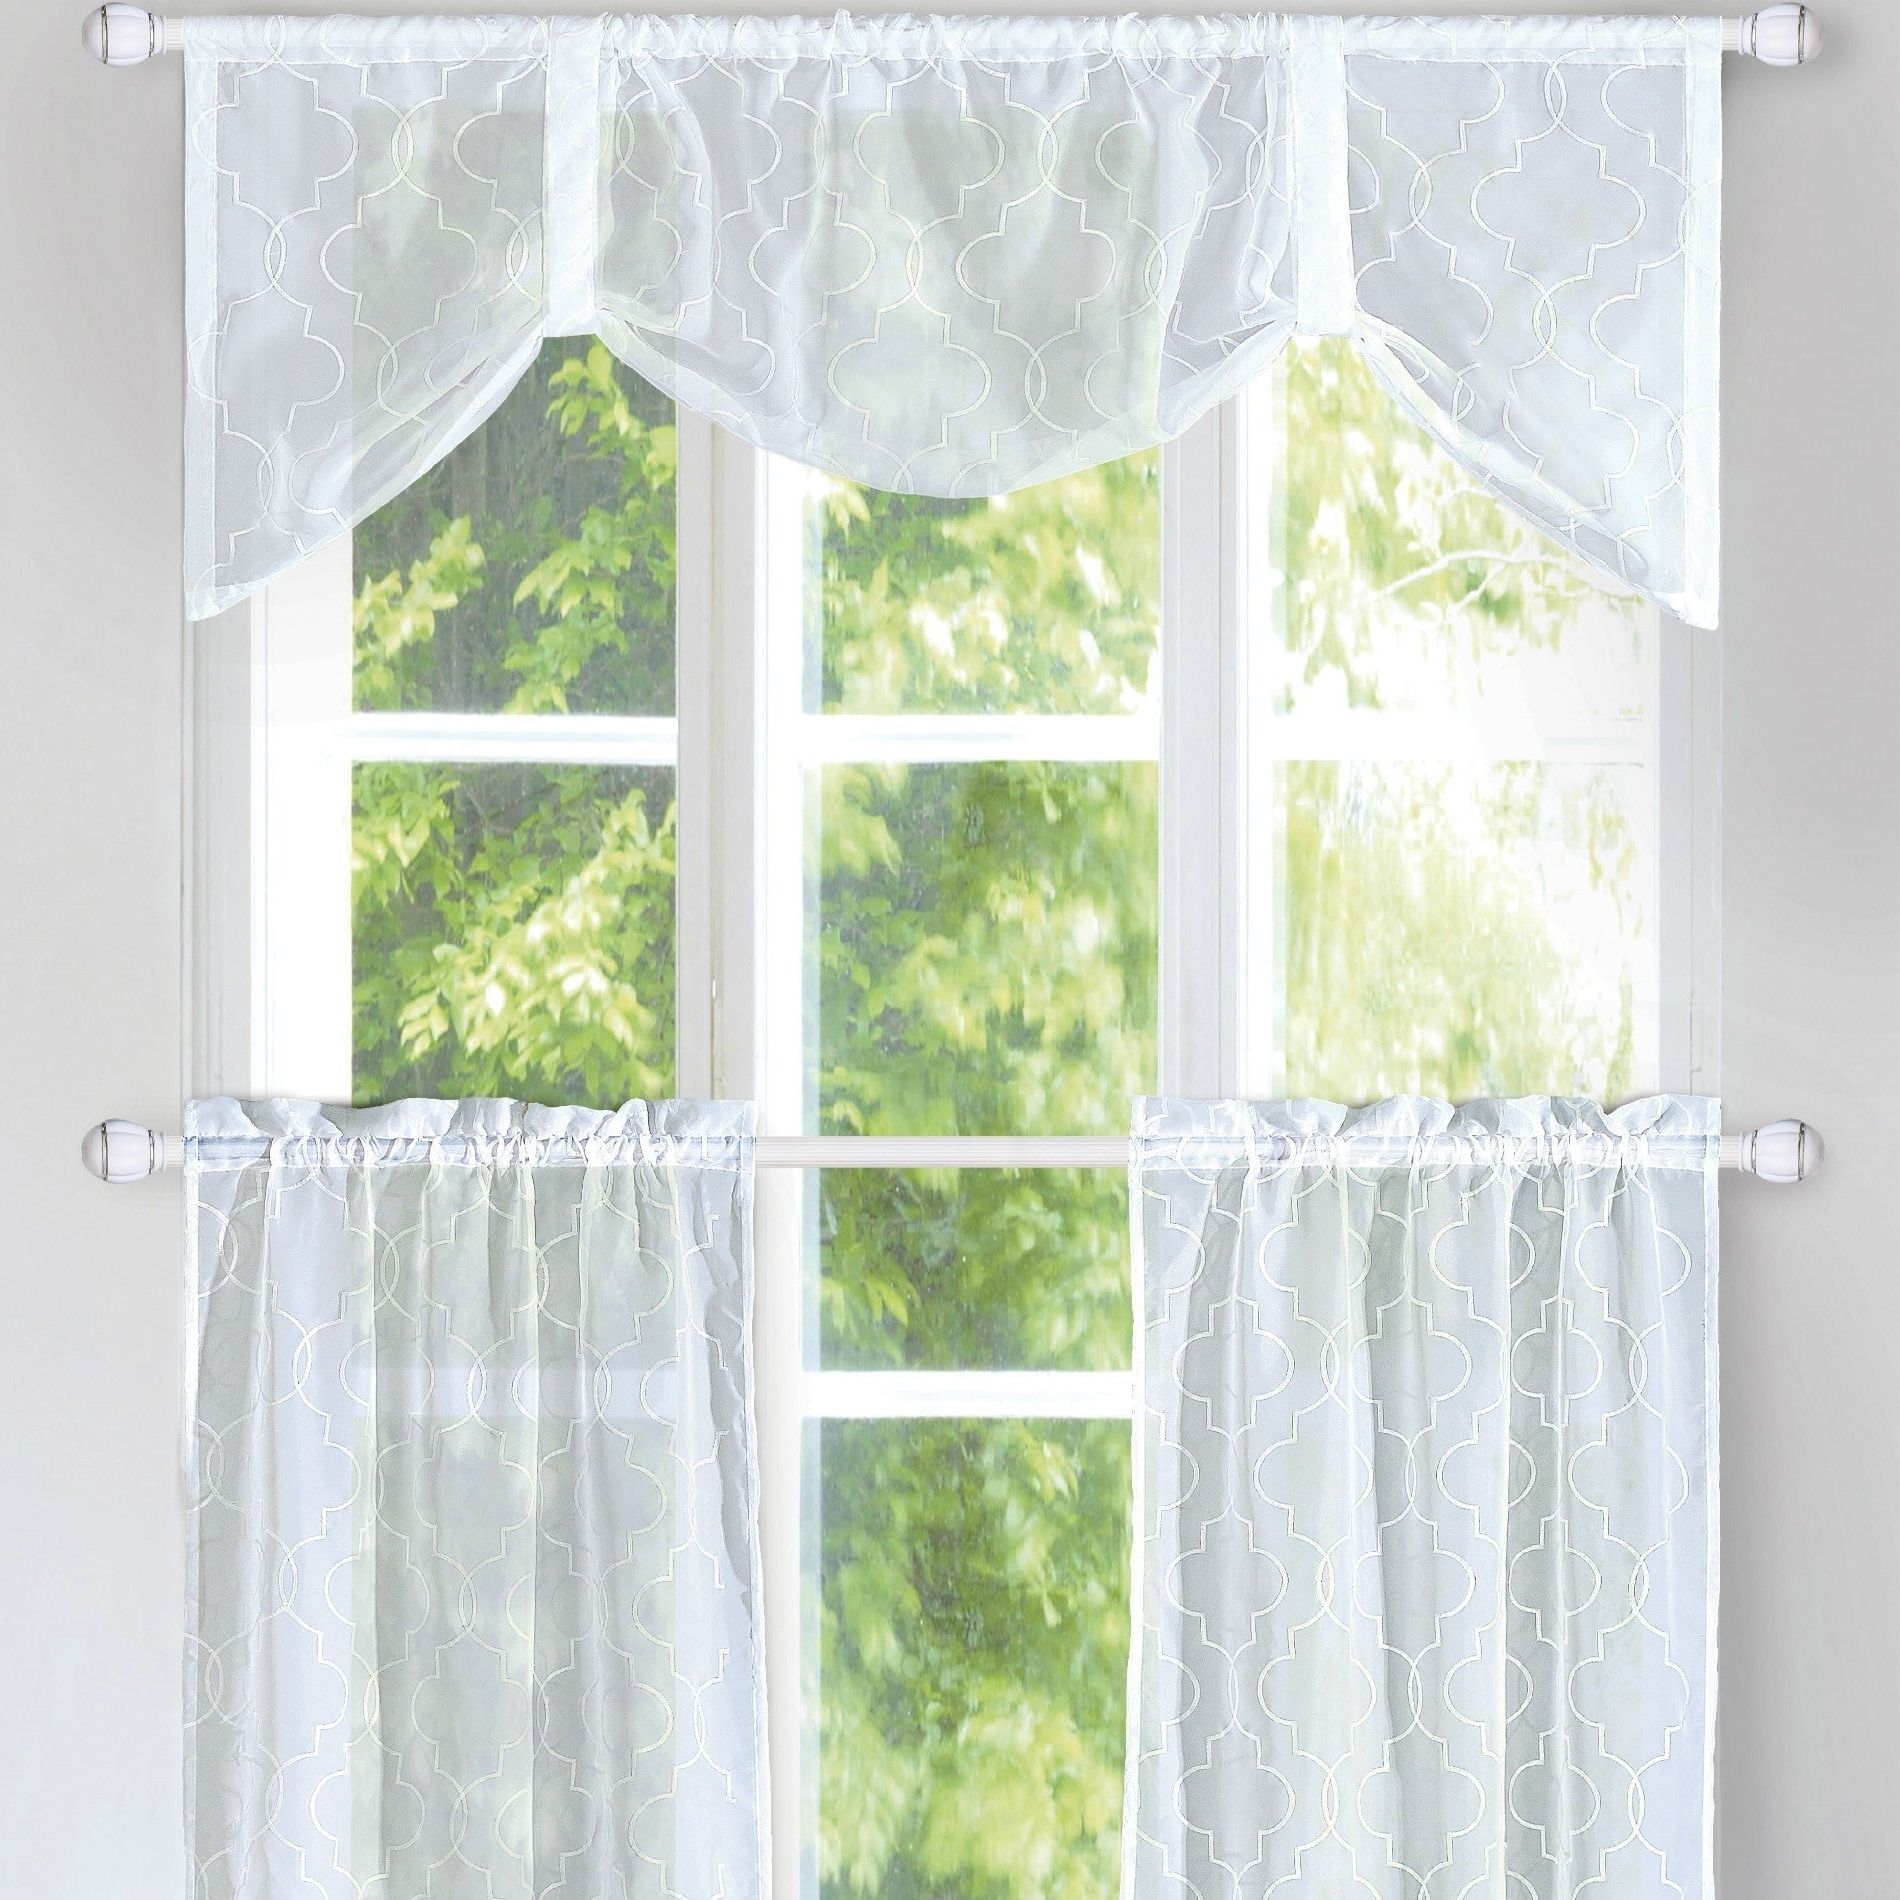 Serenta Kitchen Curtain 3 Pieces Set (rod Pocket Tier Pair / Valance) With Well Liked Light Filtering Kitchen Tiers (View 18 of 20)